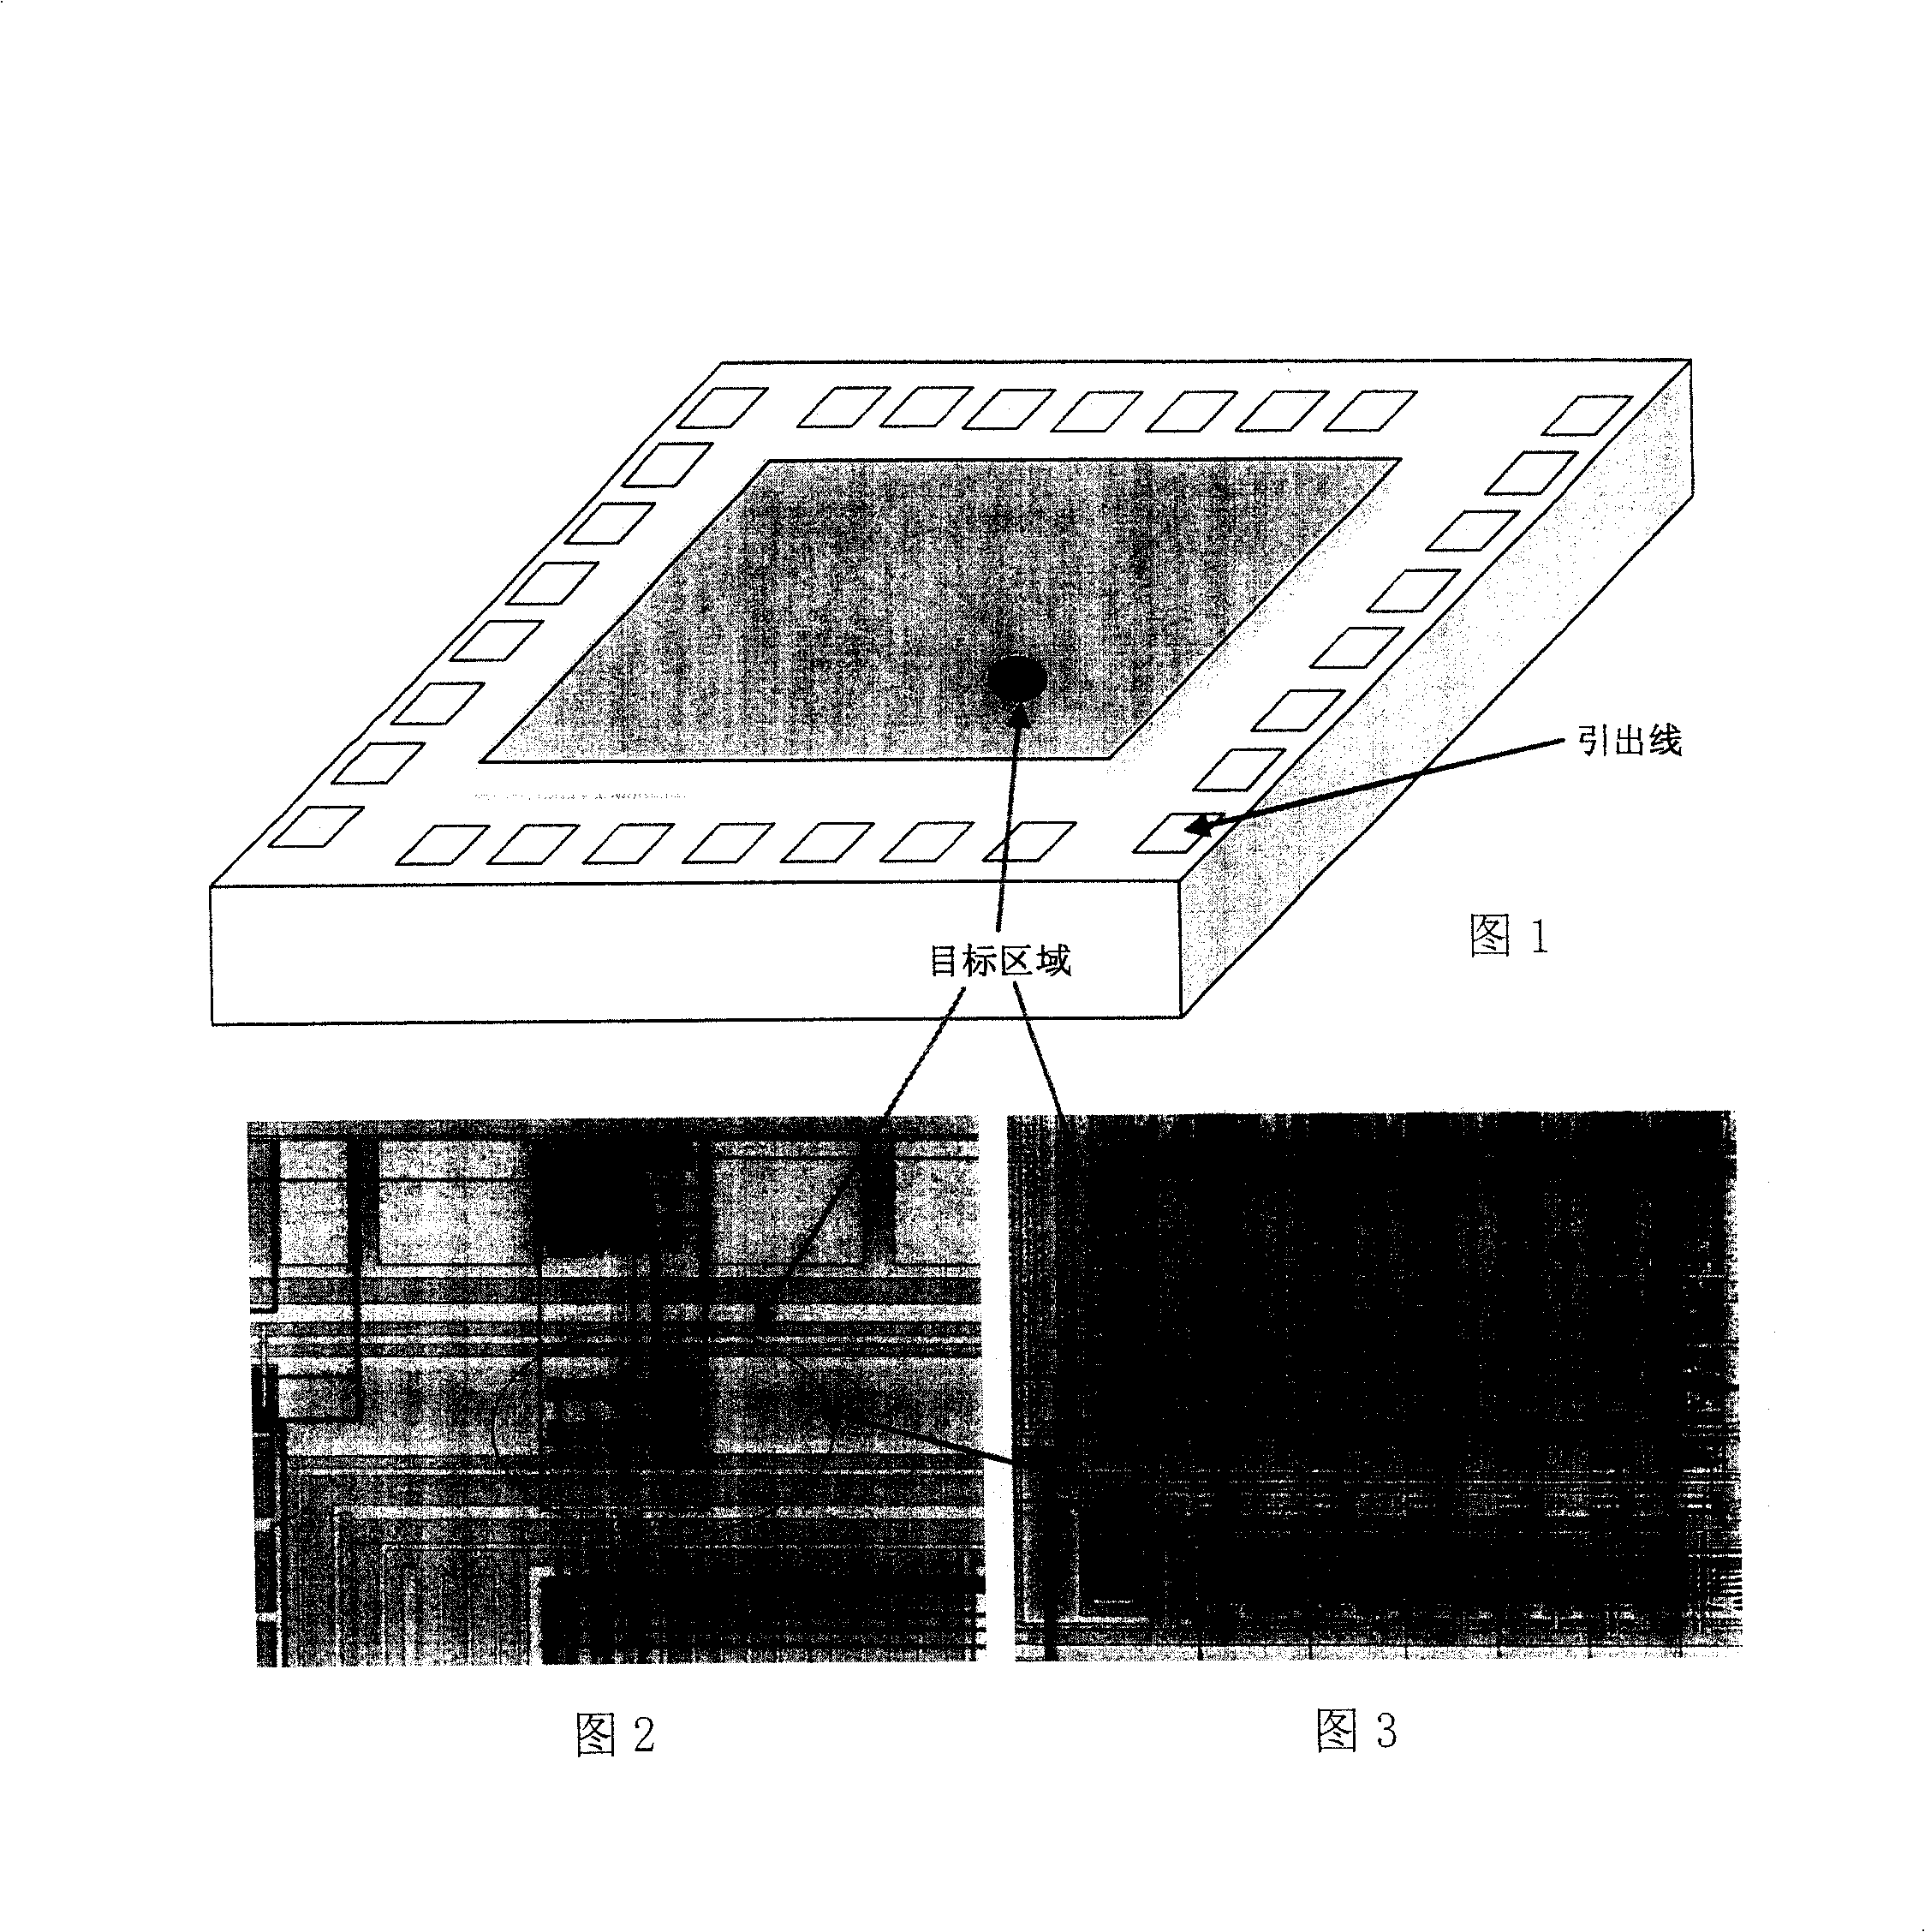 Method for focus plasma beam mending with precisivelly positioning